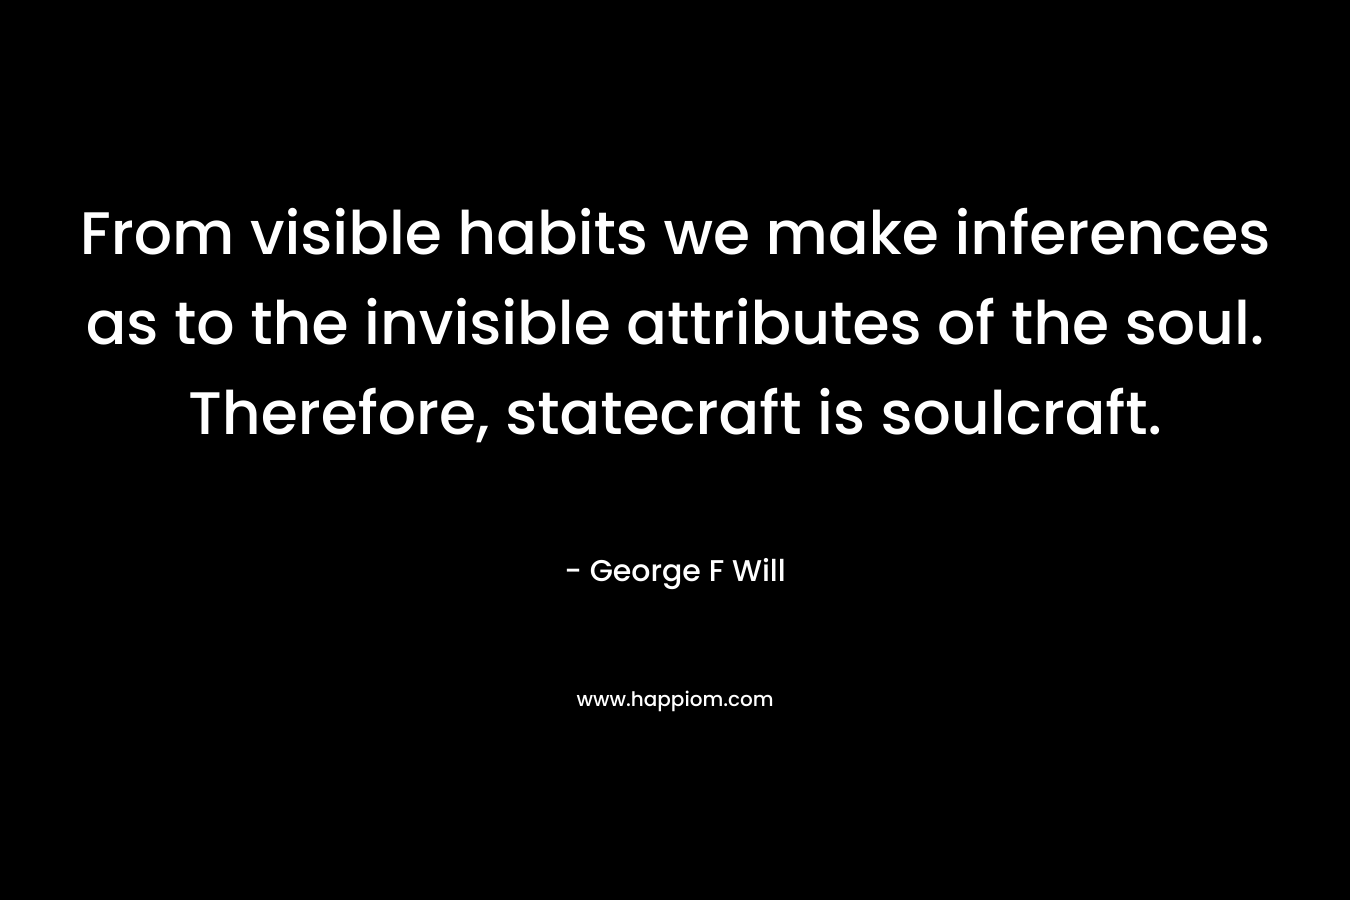 From visible habits we make inferences as to the invisible attributes of the soul. Therefore, statecraft is soulcraft. – George F Will